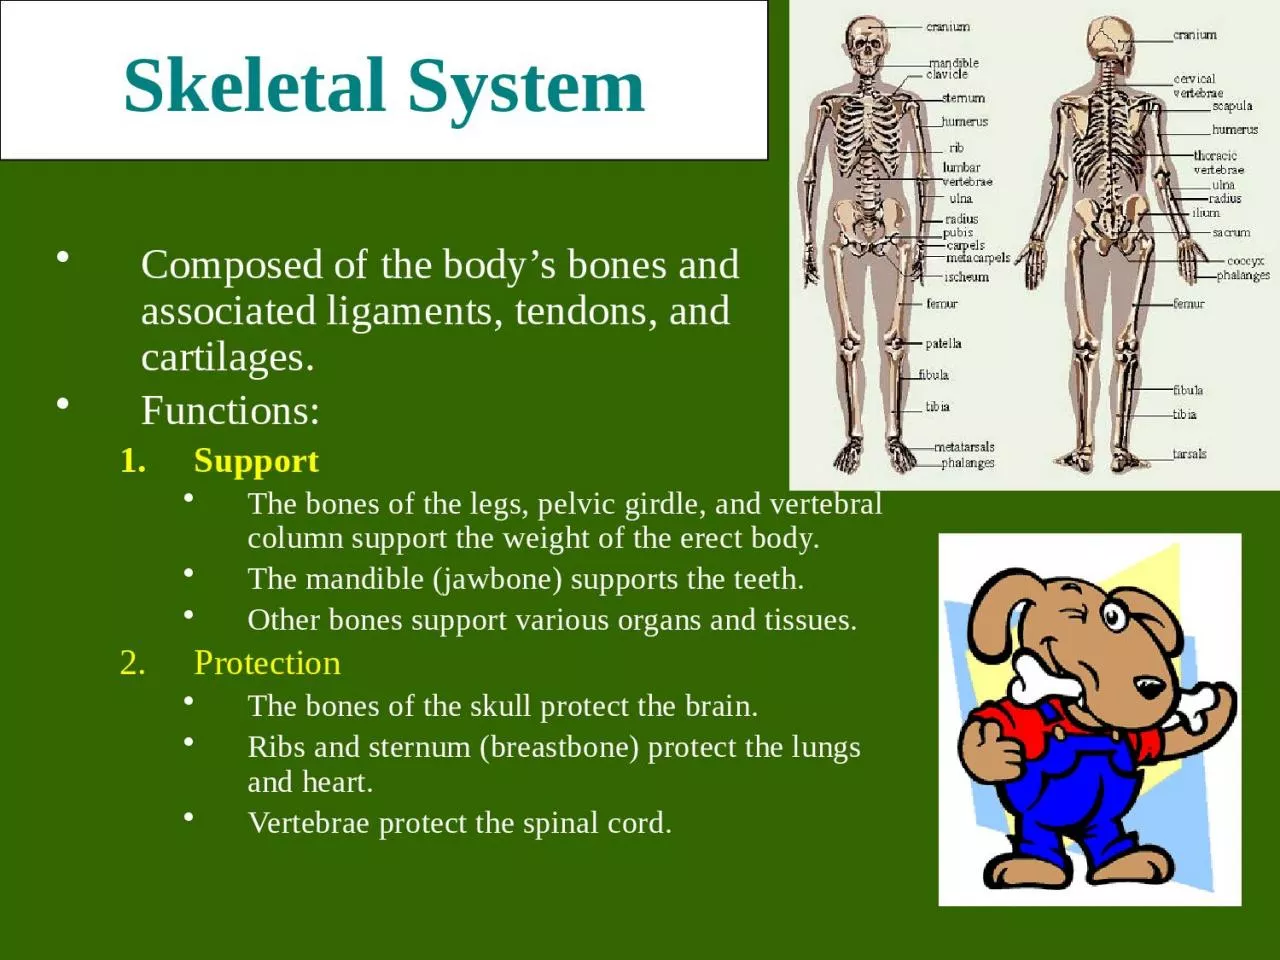 Skeletal System Composed of the body’s bones and associated ligaments, tendons, and